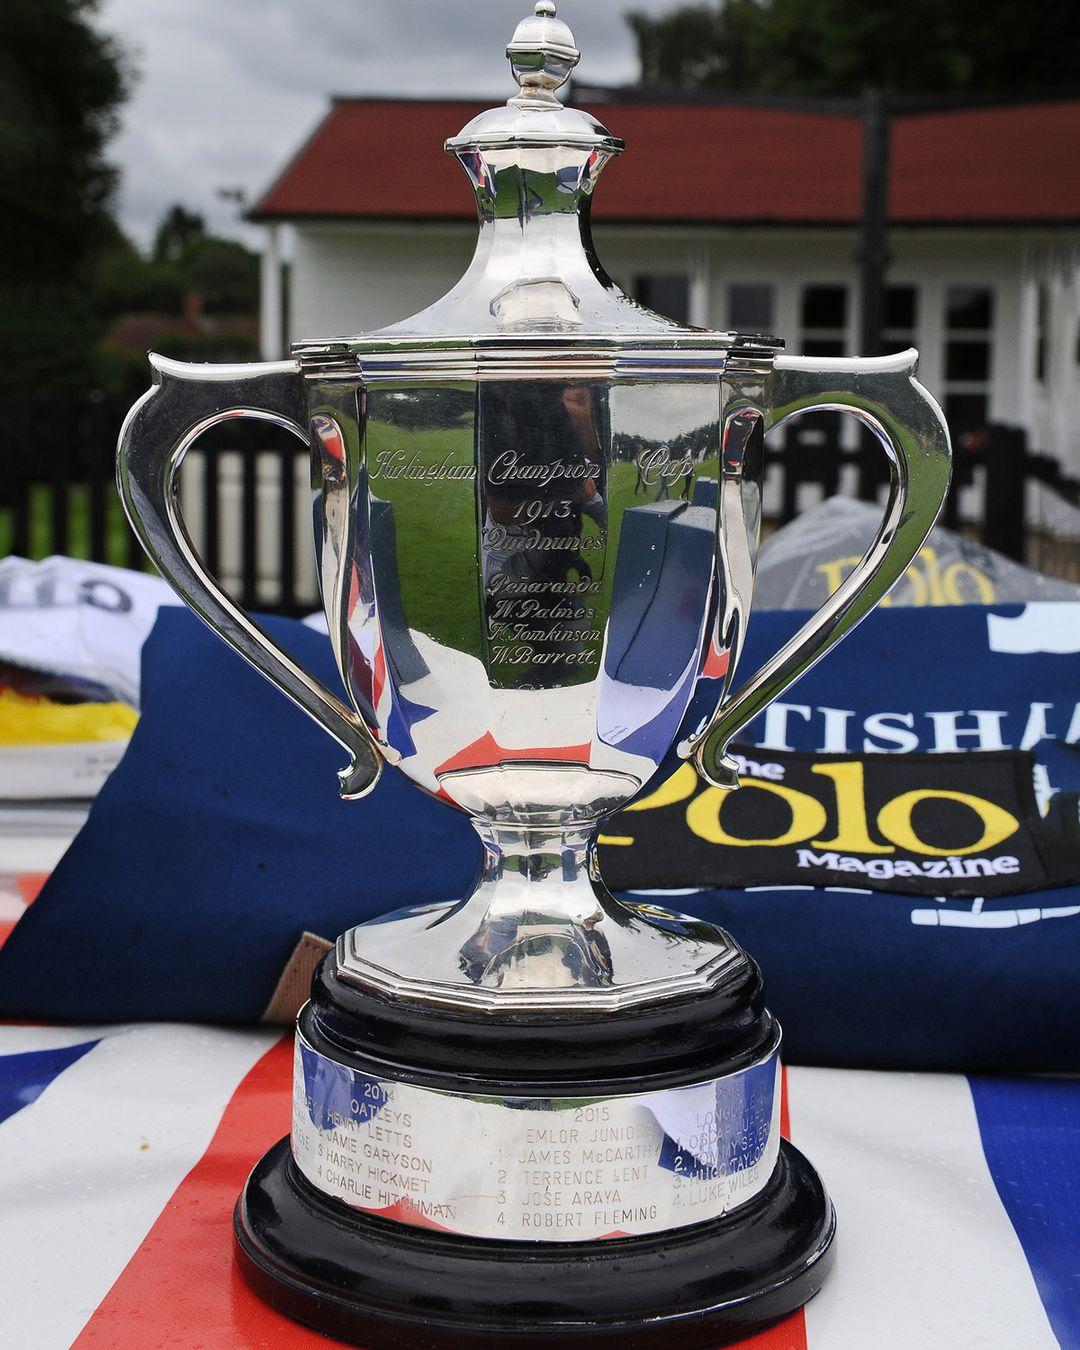 class="content__text"
 THE BUCKMASTER IS BACK! 🏆

For the first time since 2019, teams will line up to play for the coveted Buckmaster Trophy at @beaufortpoloclub this weekend. YOUNG ENGLAND will play YOUNG NEW ZEALAND in a showdown for this historic cup as part of the @glosfestivalofpolo 🐎

Playing for 🏴󠁧󠁢󠁥󠁮󠁧󠁿 will be @frankiebarlow9 , @tobybradshaw1@willmillard_@rufus.uloth 
They will face the team from 🇳🇿 of @zoereader@oscar_jack_power@applebylachie@_george_cronin_ 

We can't wait to watch - who are you looking forward to seeing? 🐎

 #polo #poloteam #englandpolo #glosfestivalofpolo #letsplaypolo 
 